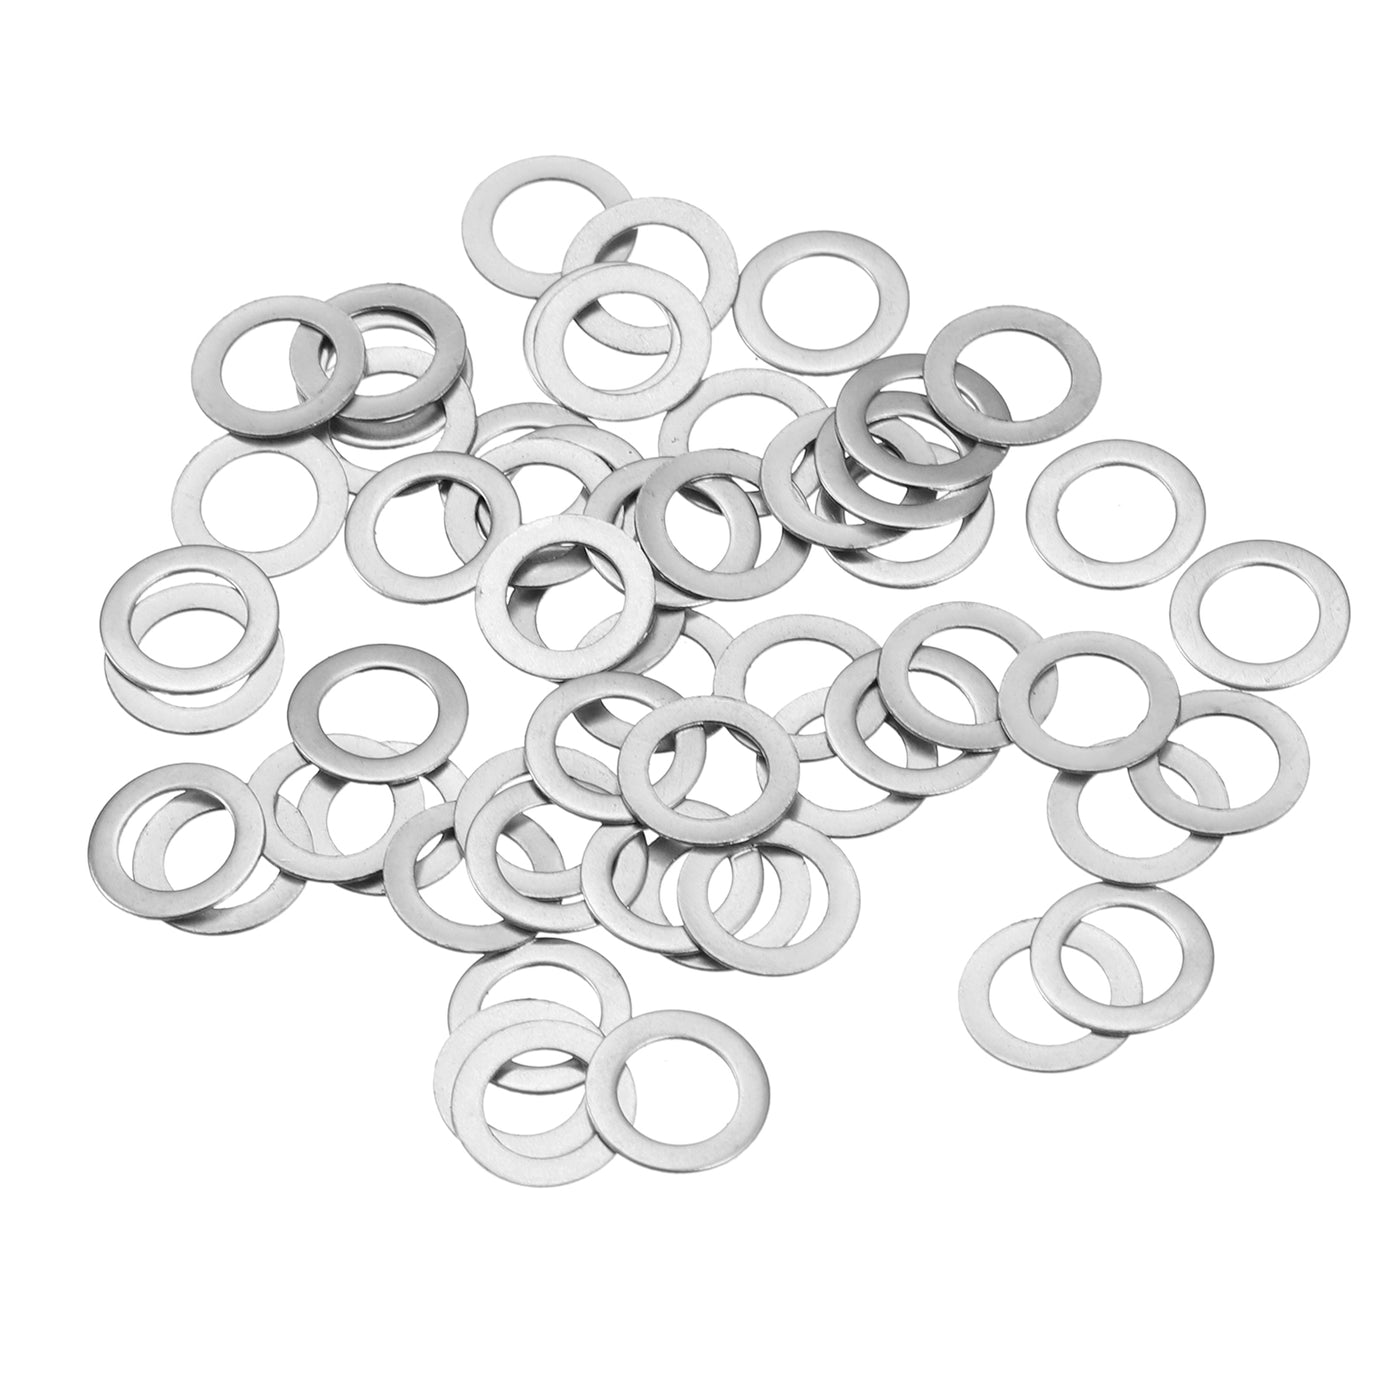 uxcell Uxcell M5 304 Stainless Steel Flat Washers, 50pcs 5x8x0.1mm Ultra Thin Flat Spacers